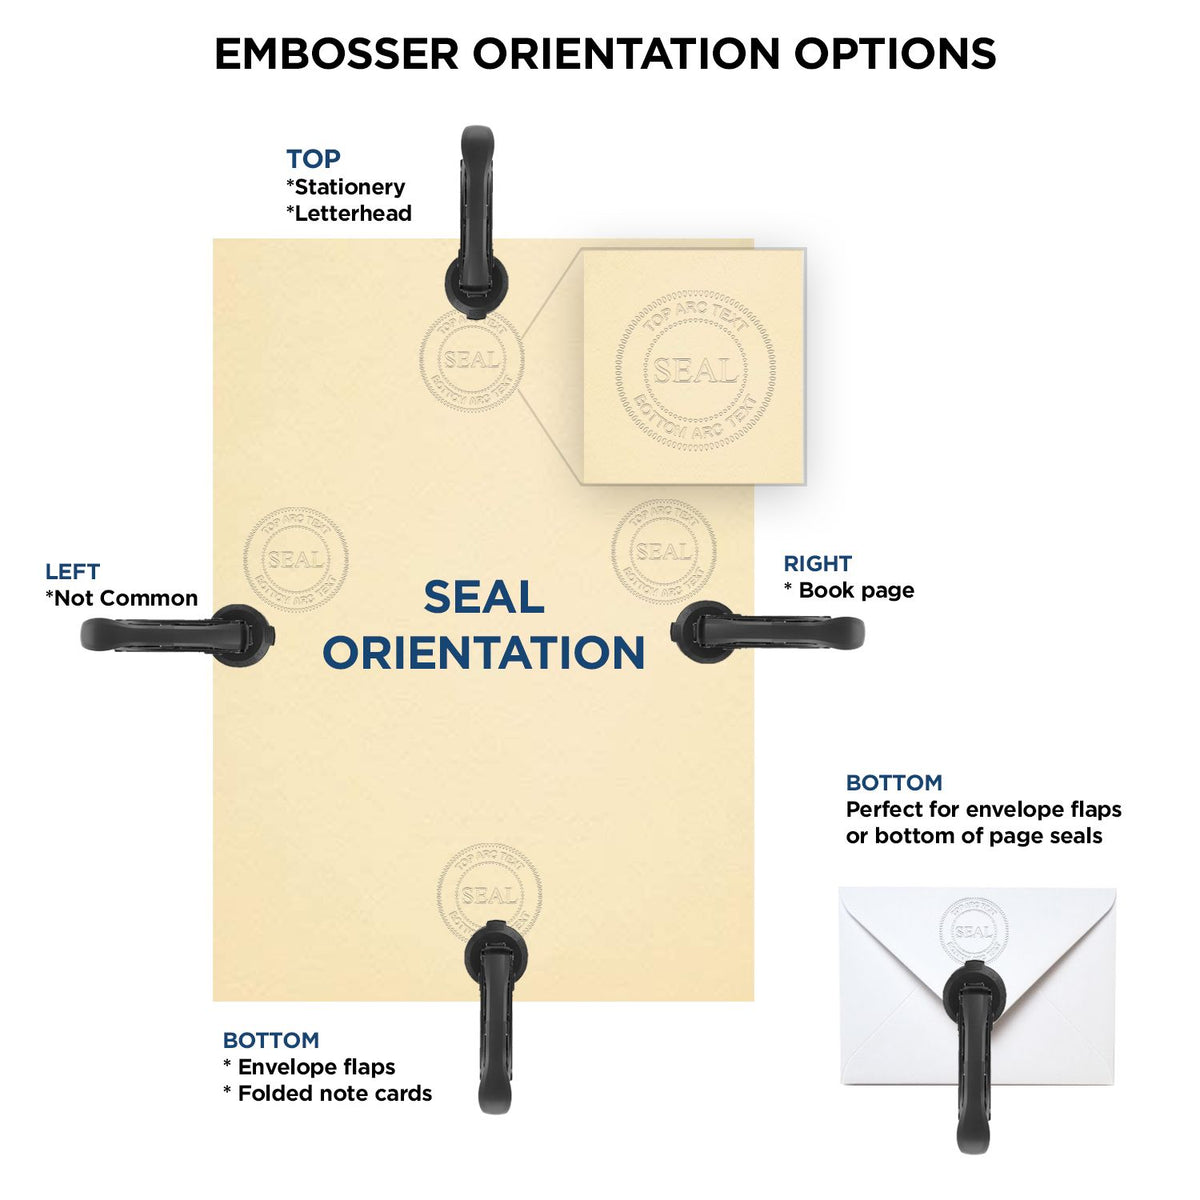 An infographic for the Rhode Island Desk Architect Embossing Seal showing embosser orientation, this is showing examples of a top, bottom, right and left insert.